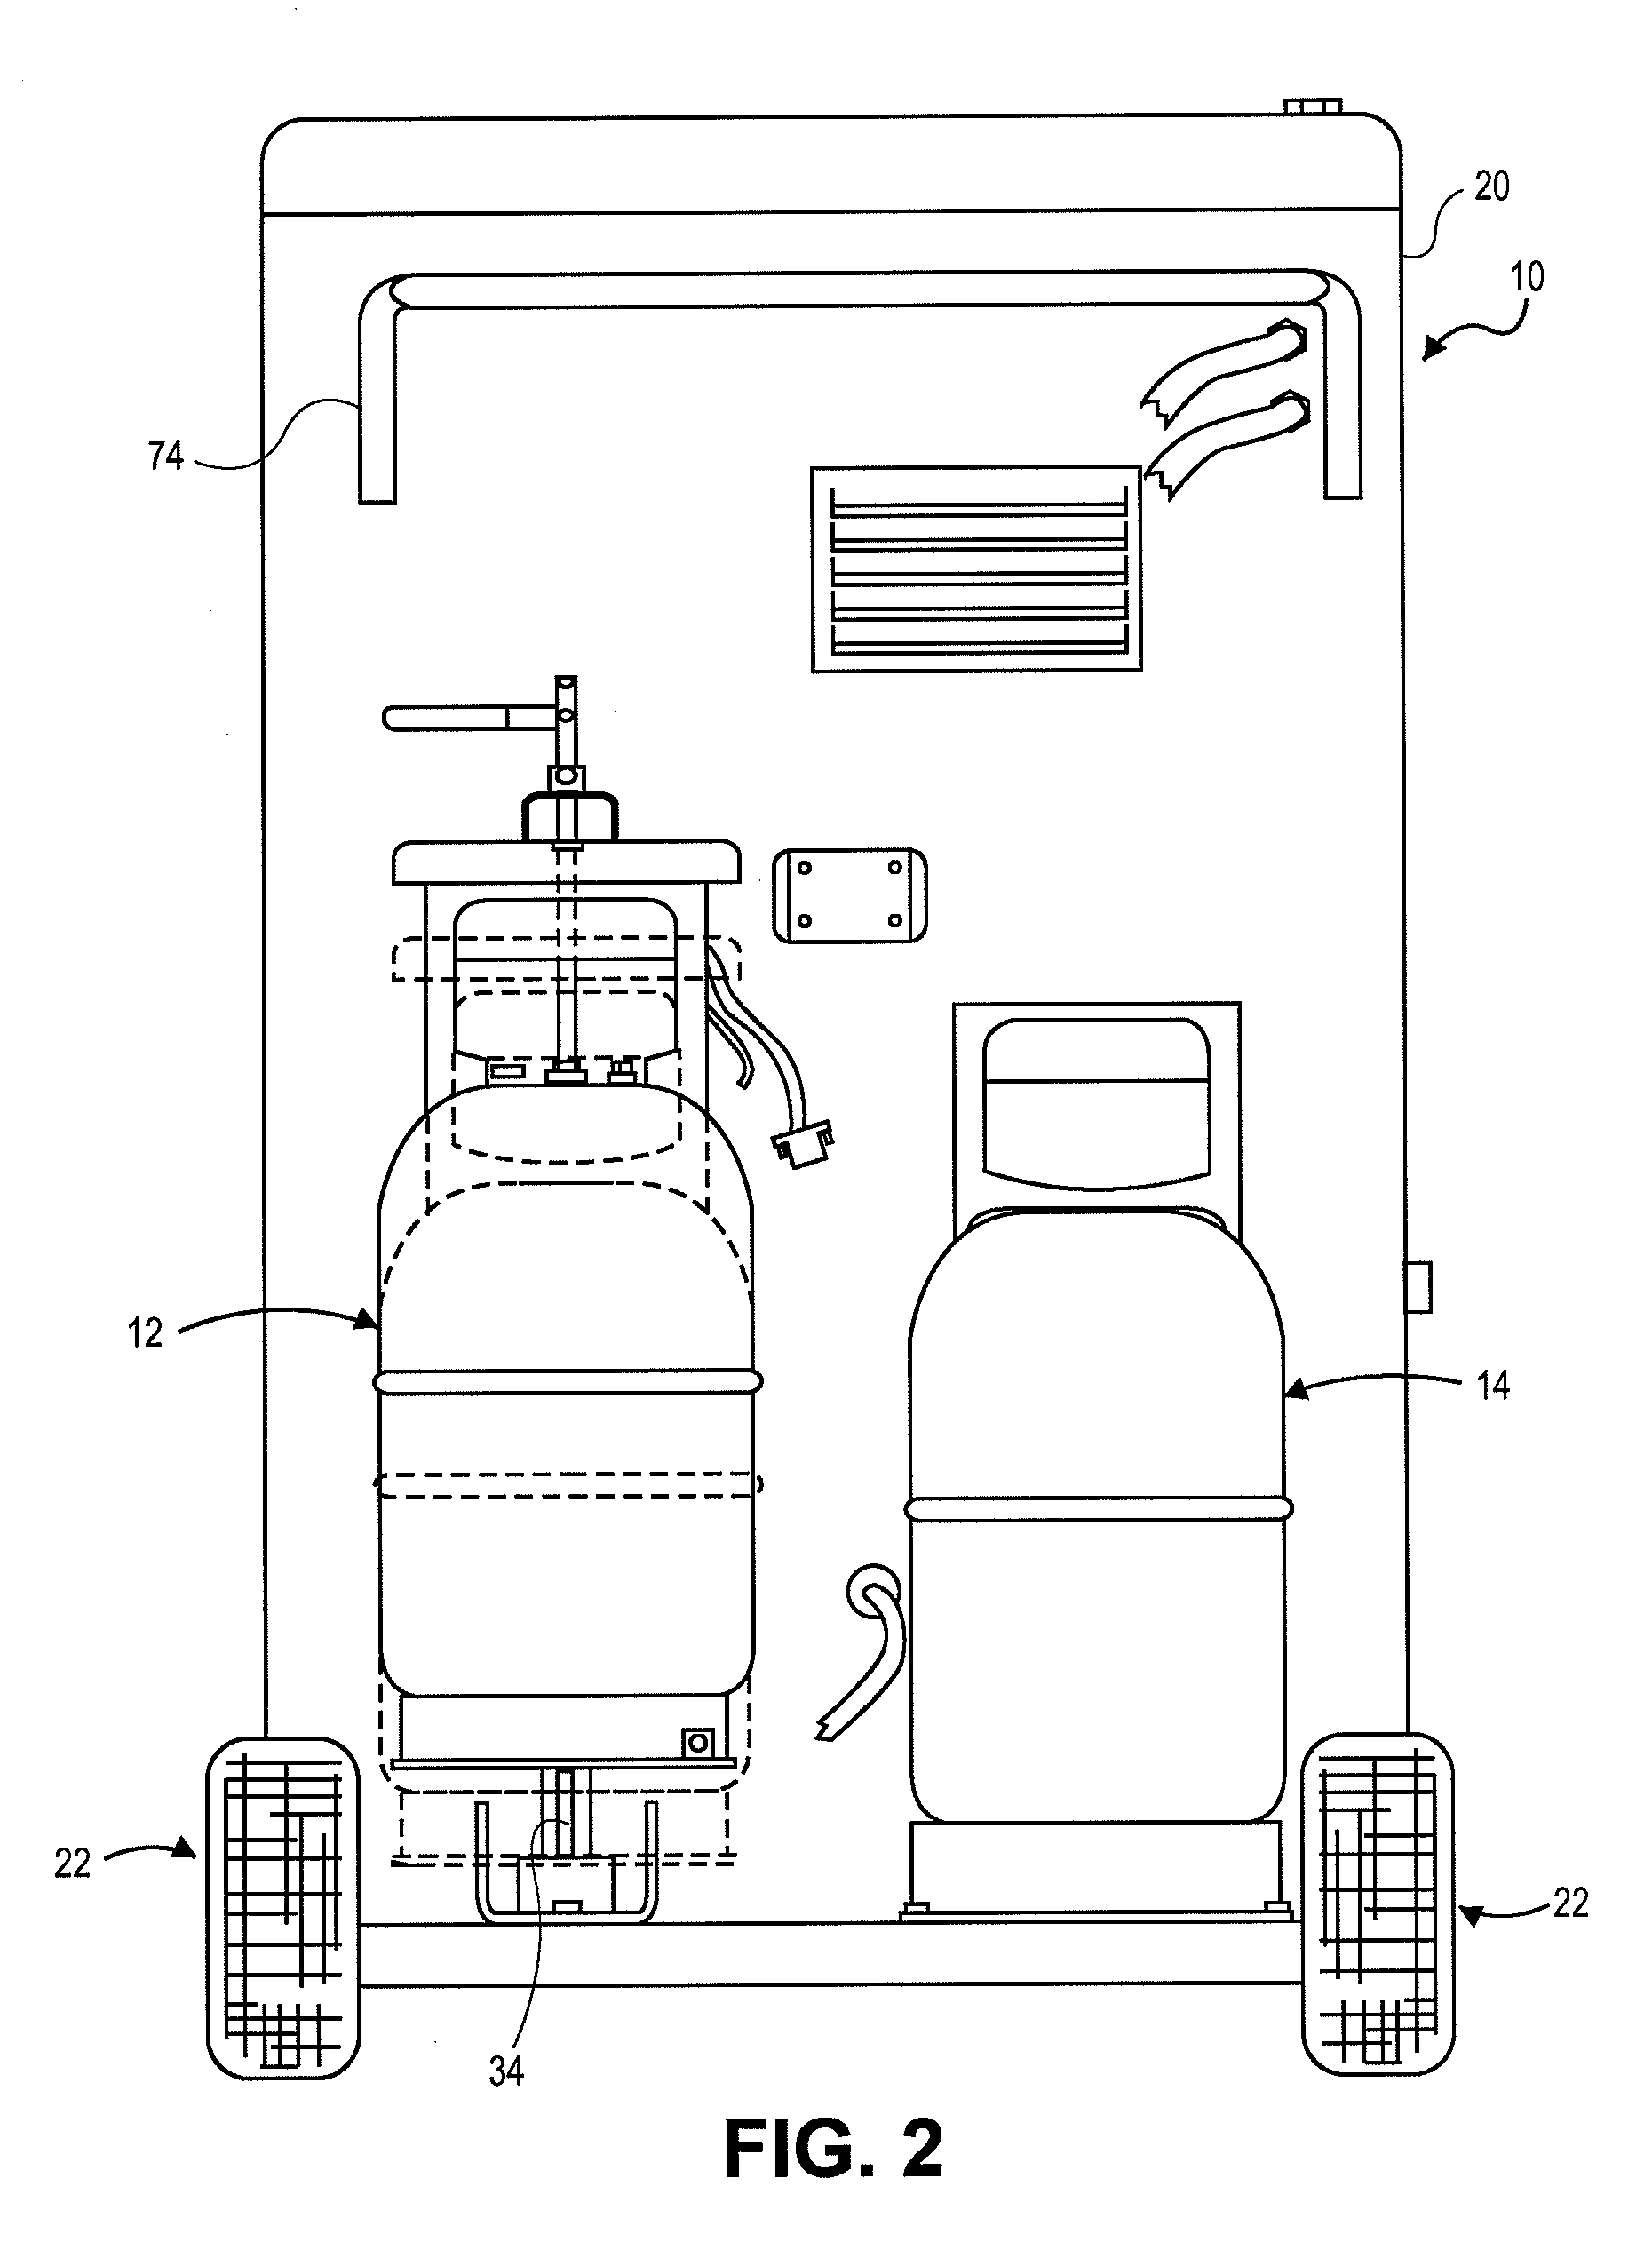 Method for using high pressure refrigerant for leak checking a system